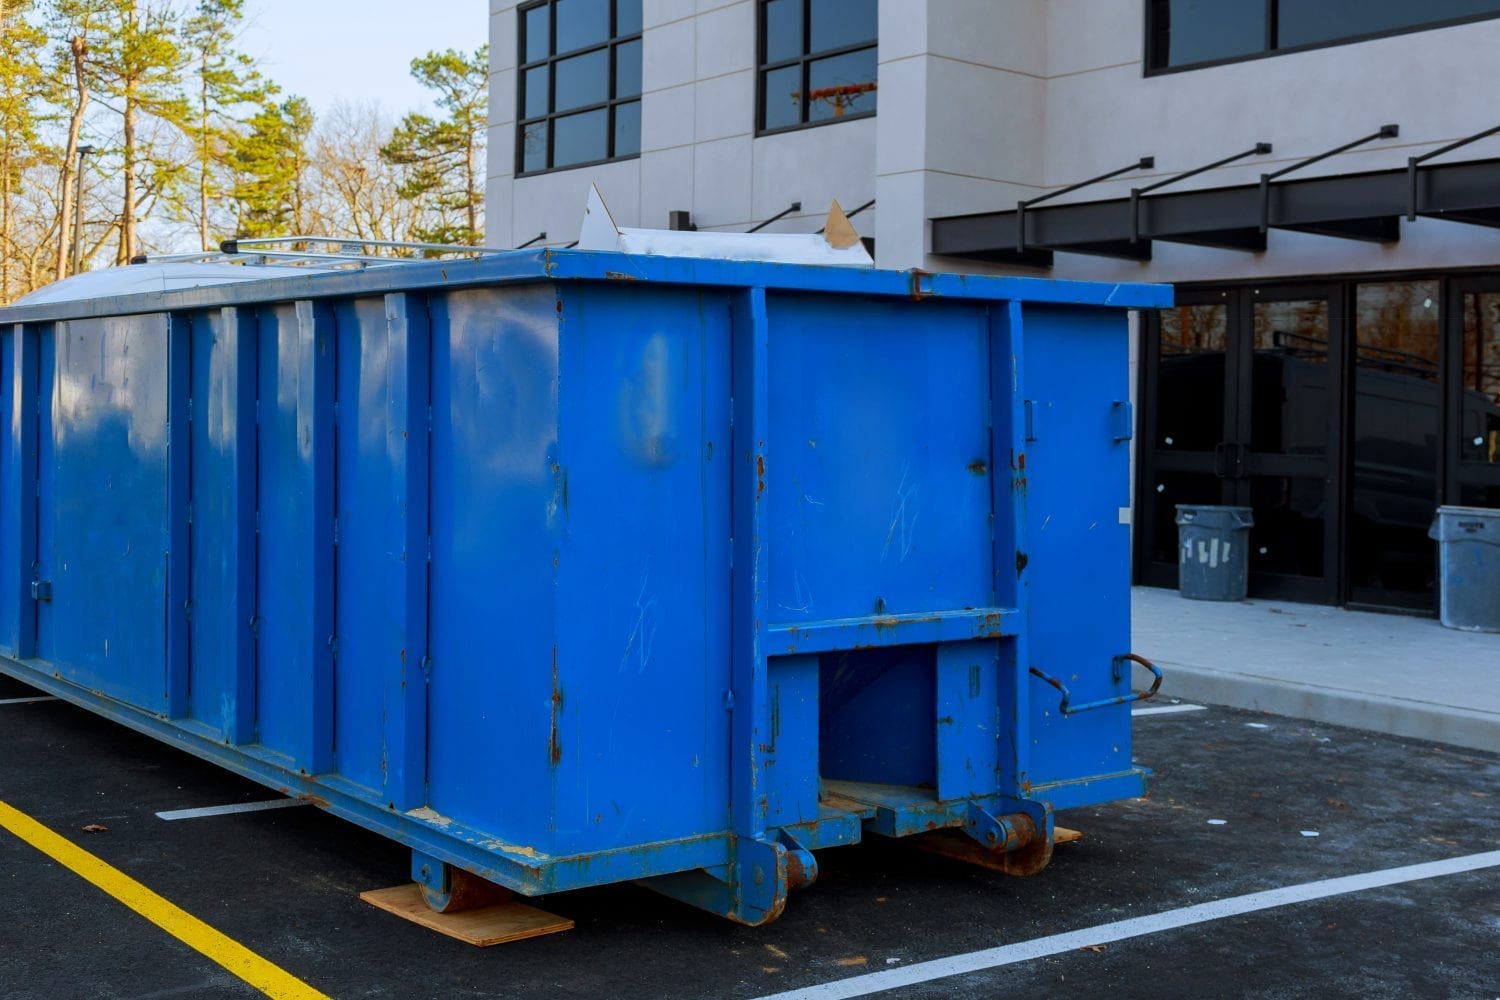 15 Yard Containers-Palm Beach County’s Best Dumpster Removal Services-We Offer Residential and Commercial Dumpster Removal Services, Dumpster Rentals, Bulk Trash, Demolition Removal, Junk Hauling, Rubbish Removal, Waste Containers, Debris Removal, 10 Yard Containers, 15 Yard to 20 Yard to 30 Yard to 40 Yard Container Rentals, and much more!